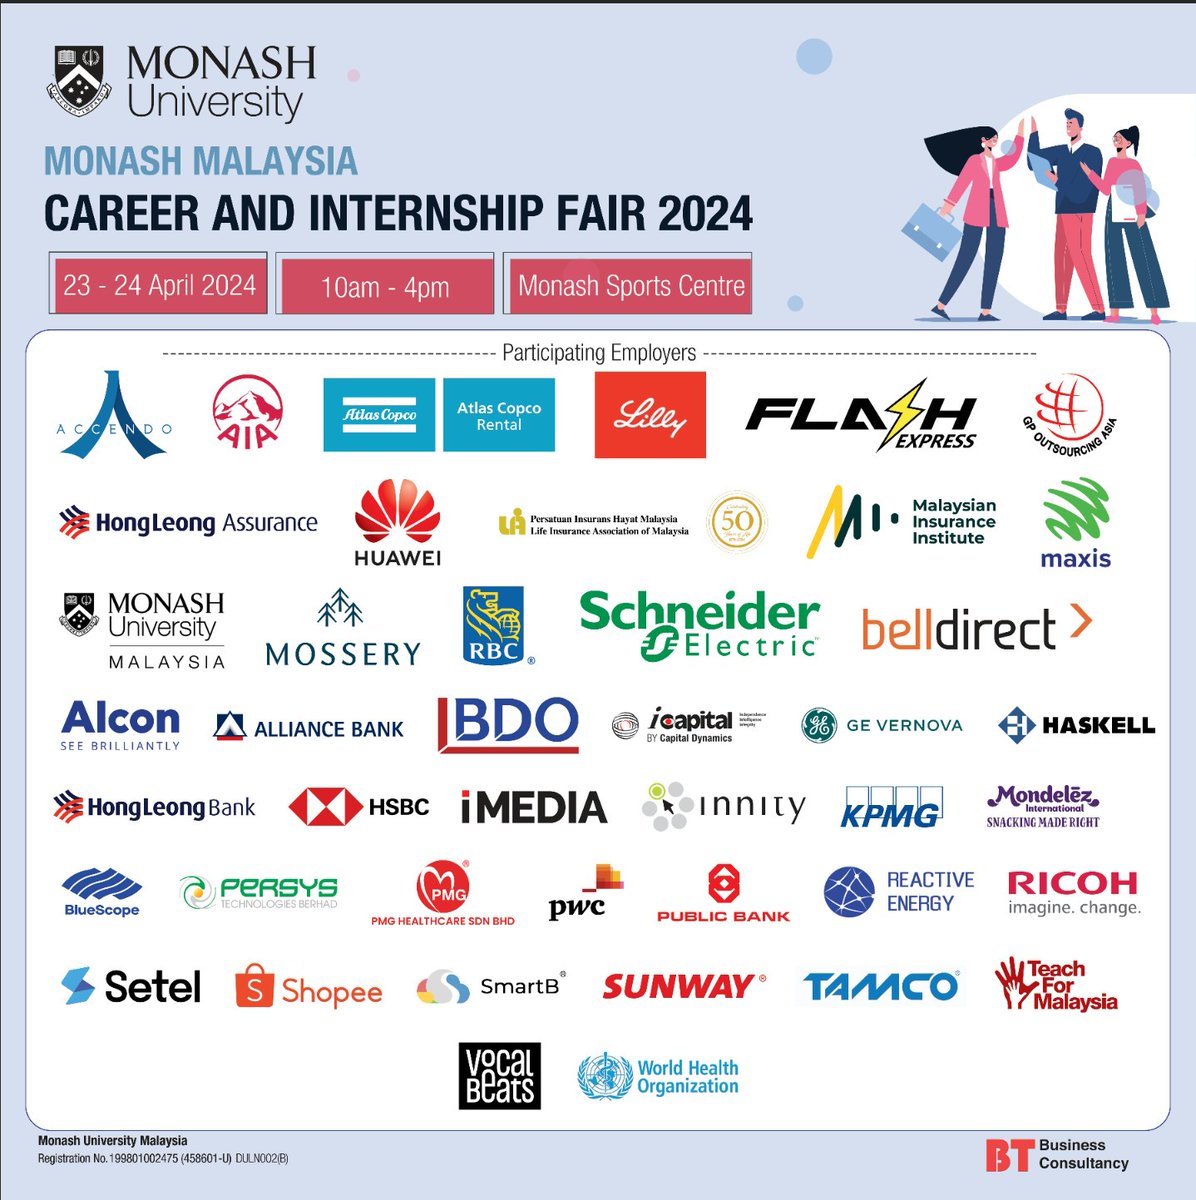 Whether you're a current student looking for an internship or a recent graduate seeking permanent #employment, we've got you covered! 🌟 Join our Career and Internship Fair from 23 to 24 April 2024. We look forward to seeing you there!